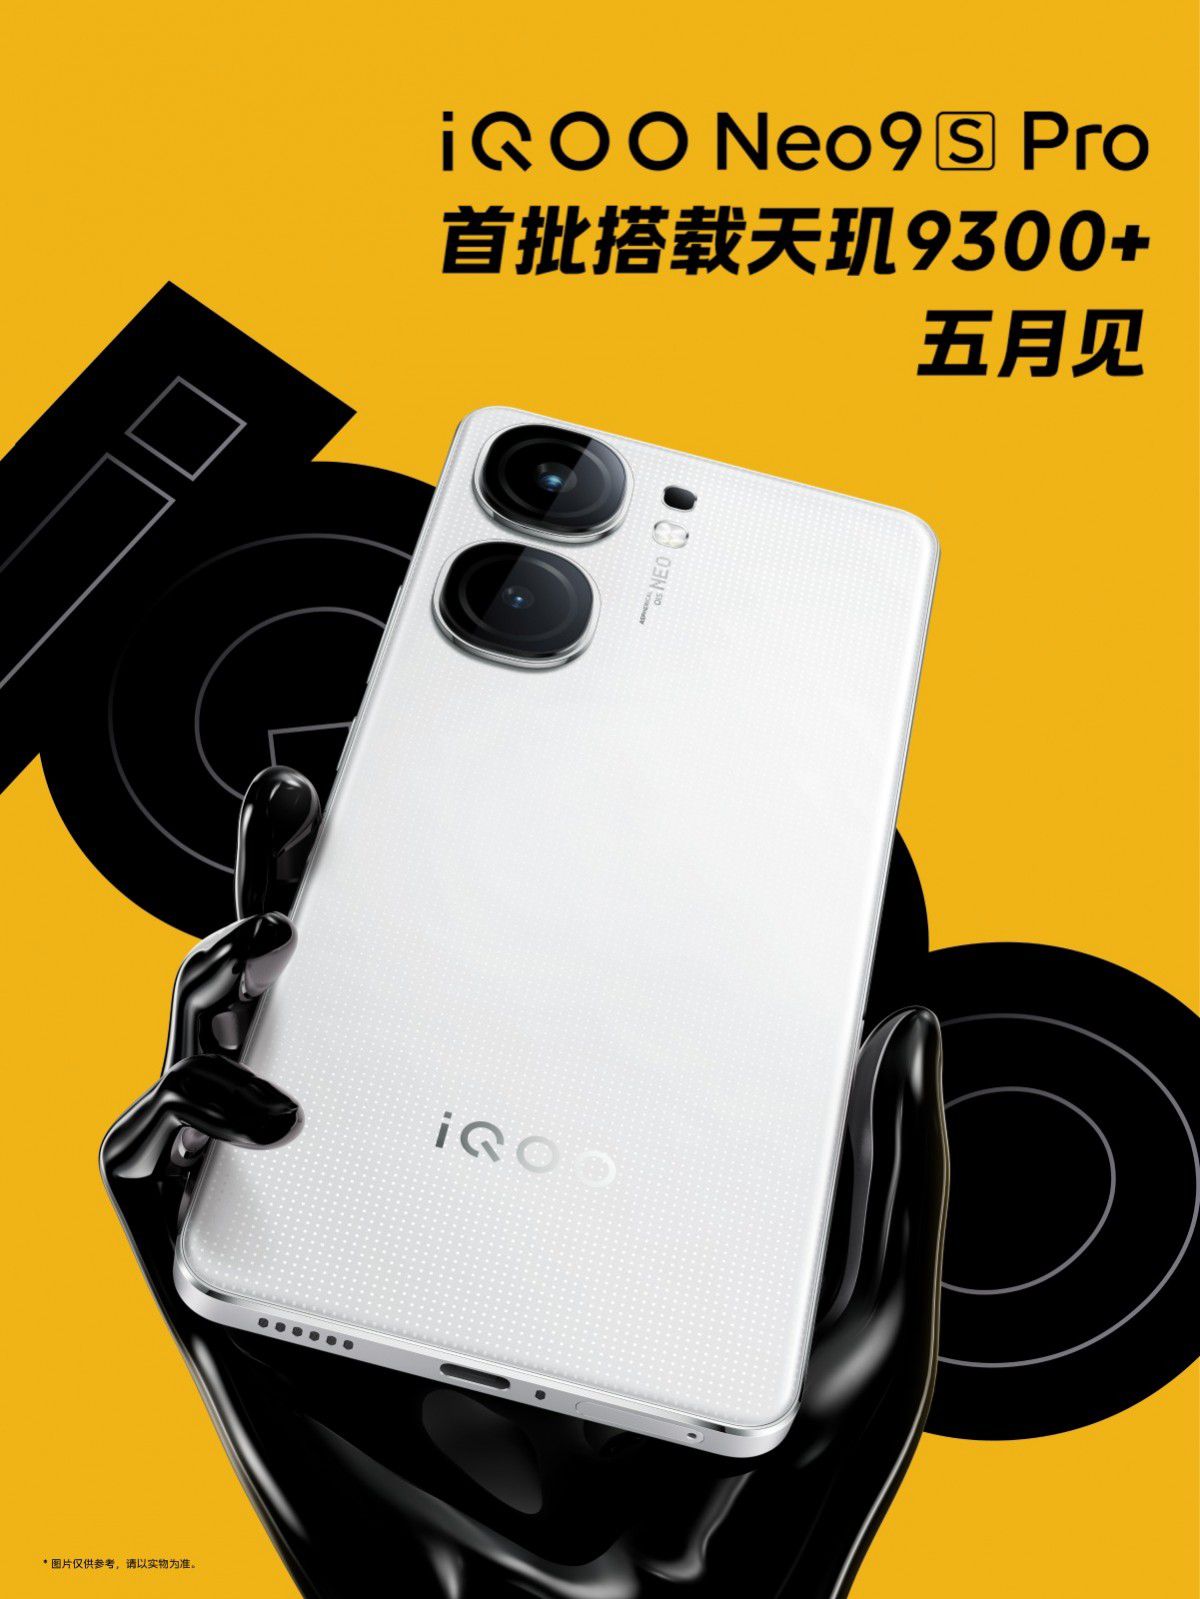 iQOO released Neo 9 Pro powered by Dimensity 9300 chipset